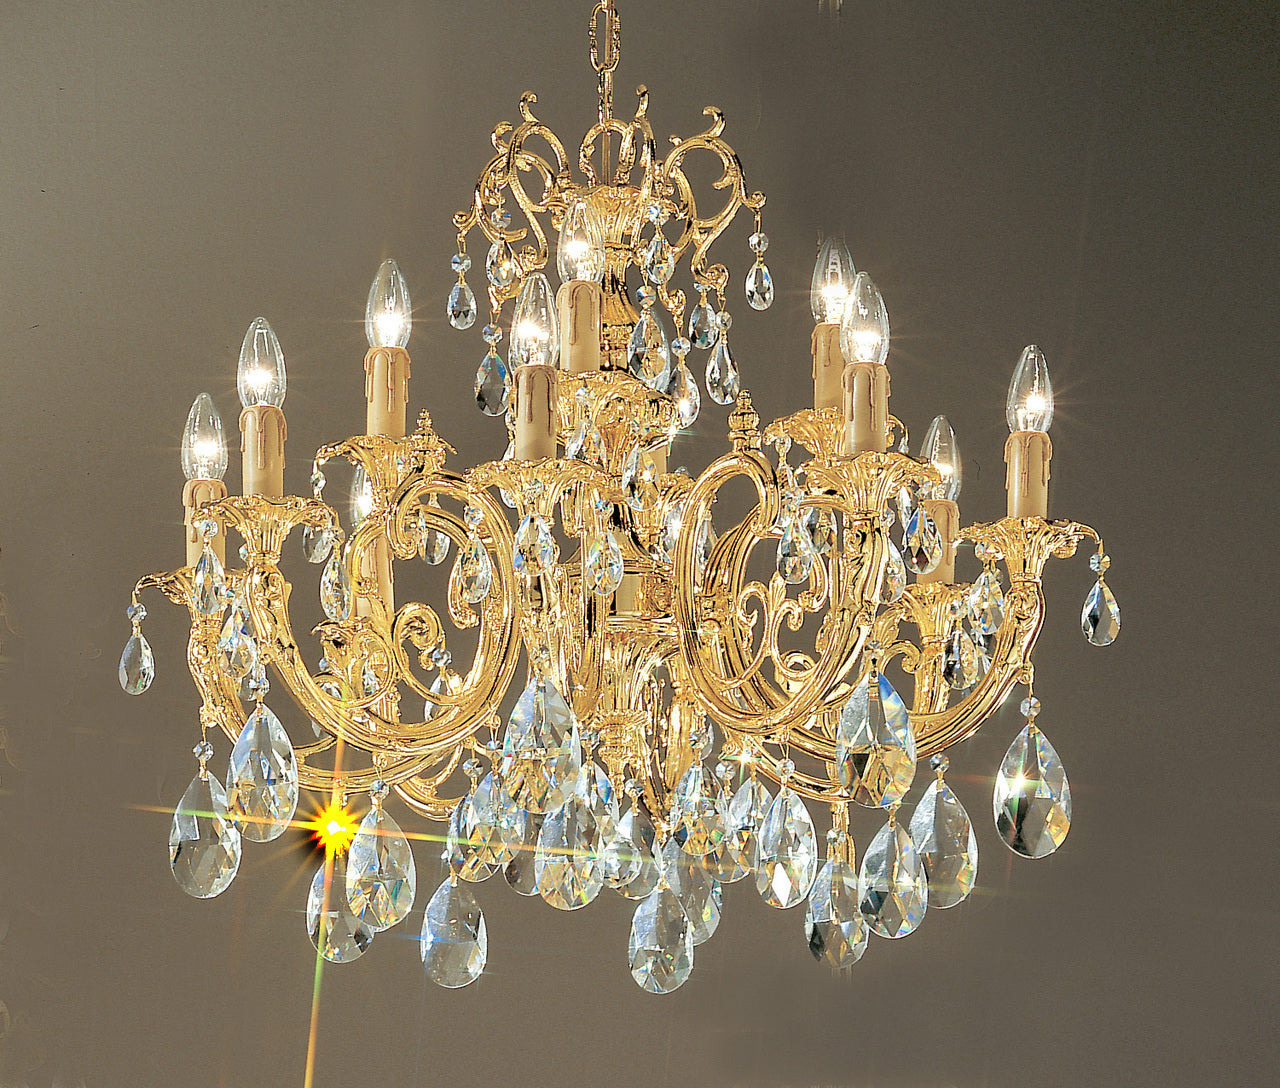 Classic Lighting 5712 G SC Princeton Crystal/Cast Brass Chandelier in 24k Gold (Imported from Spain)